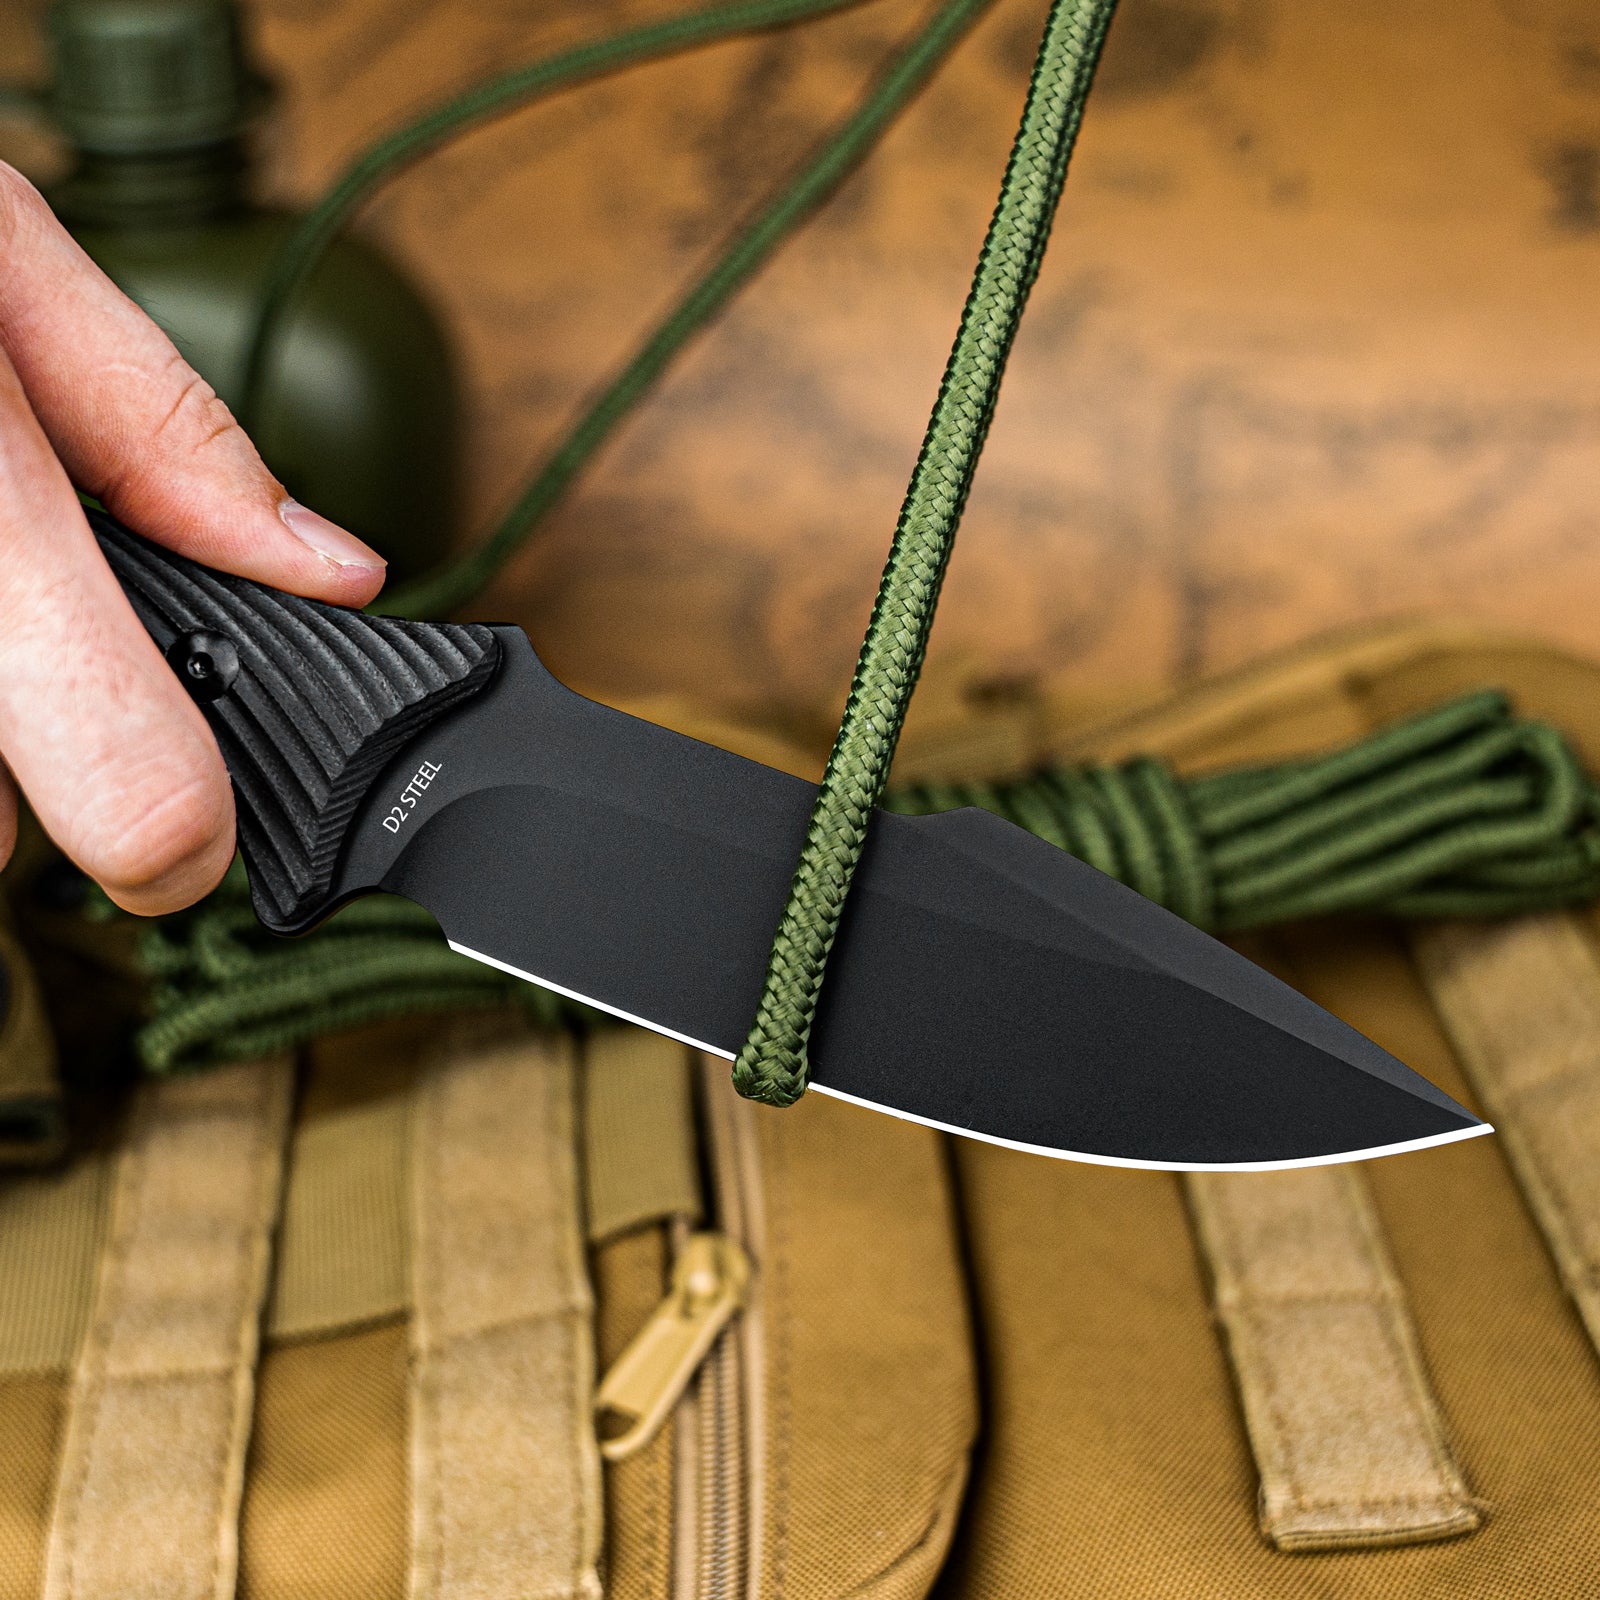 LOTHAR KA52 Survival Knife, 4.5'' D2 Blade Full Tang Fixed Blade Hunting Knife with Kydex Sheath, Black G10 Handle,  Great Knife for Camping, Bushcraft or Hunting